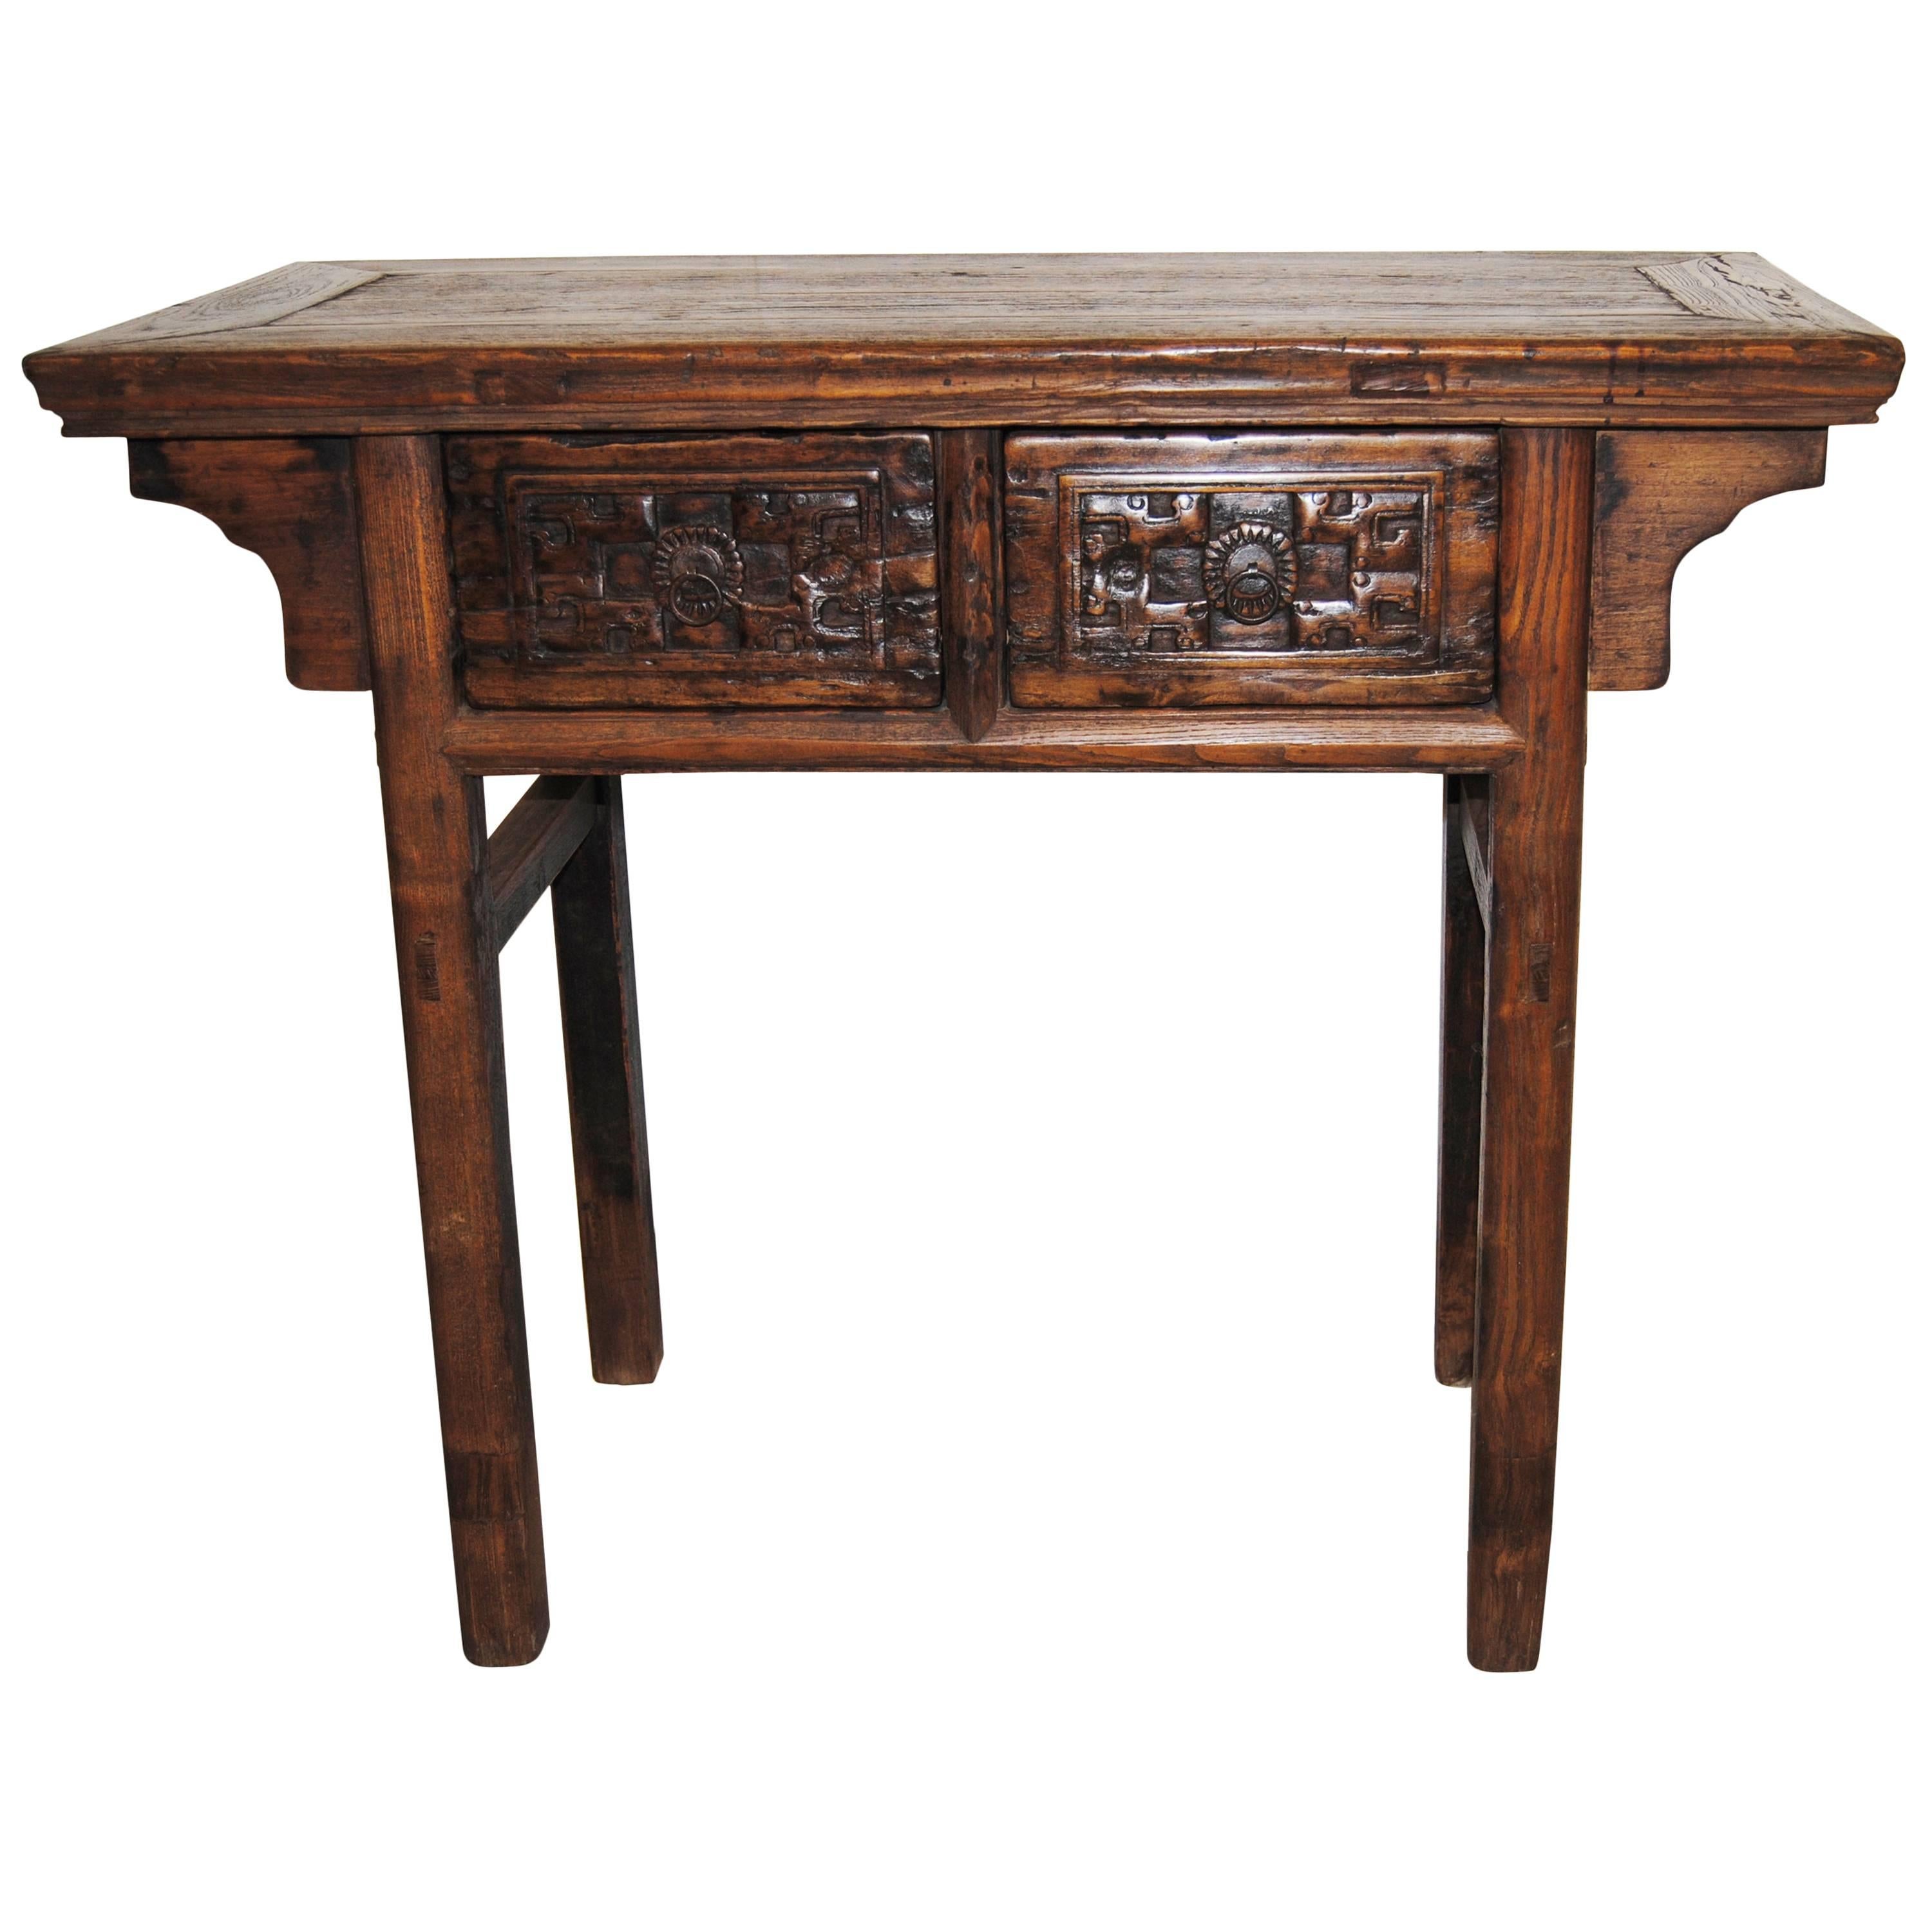 Antique Chinese Elmwood Table with Hand-Carved Drawers, Mid-19th Century